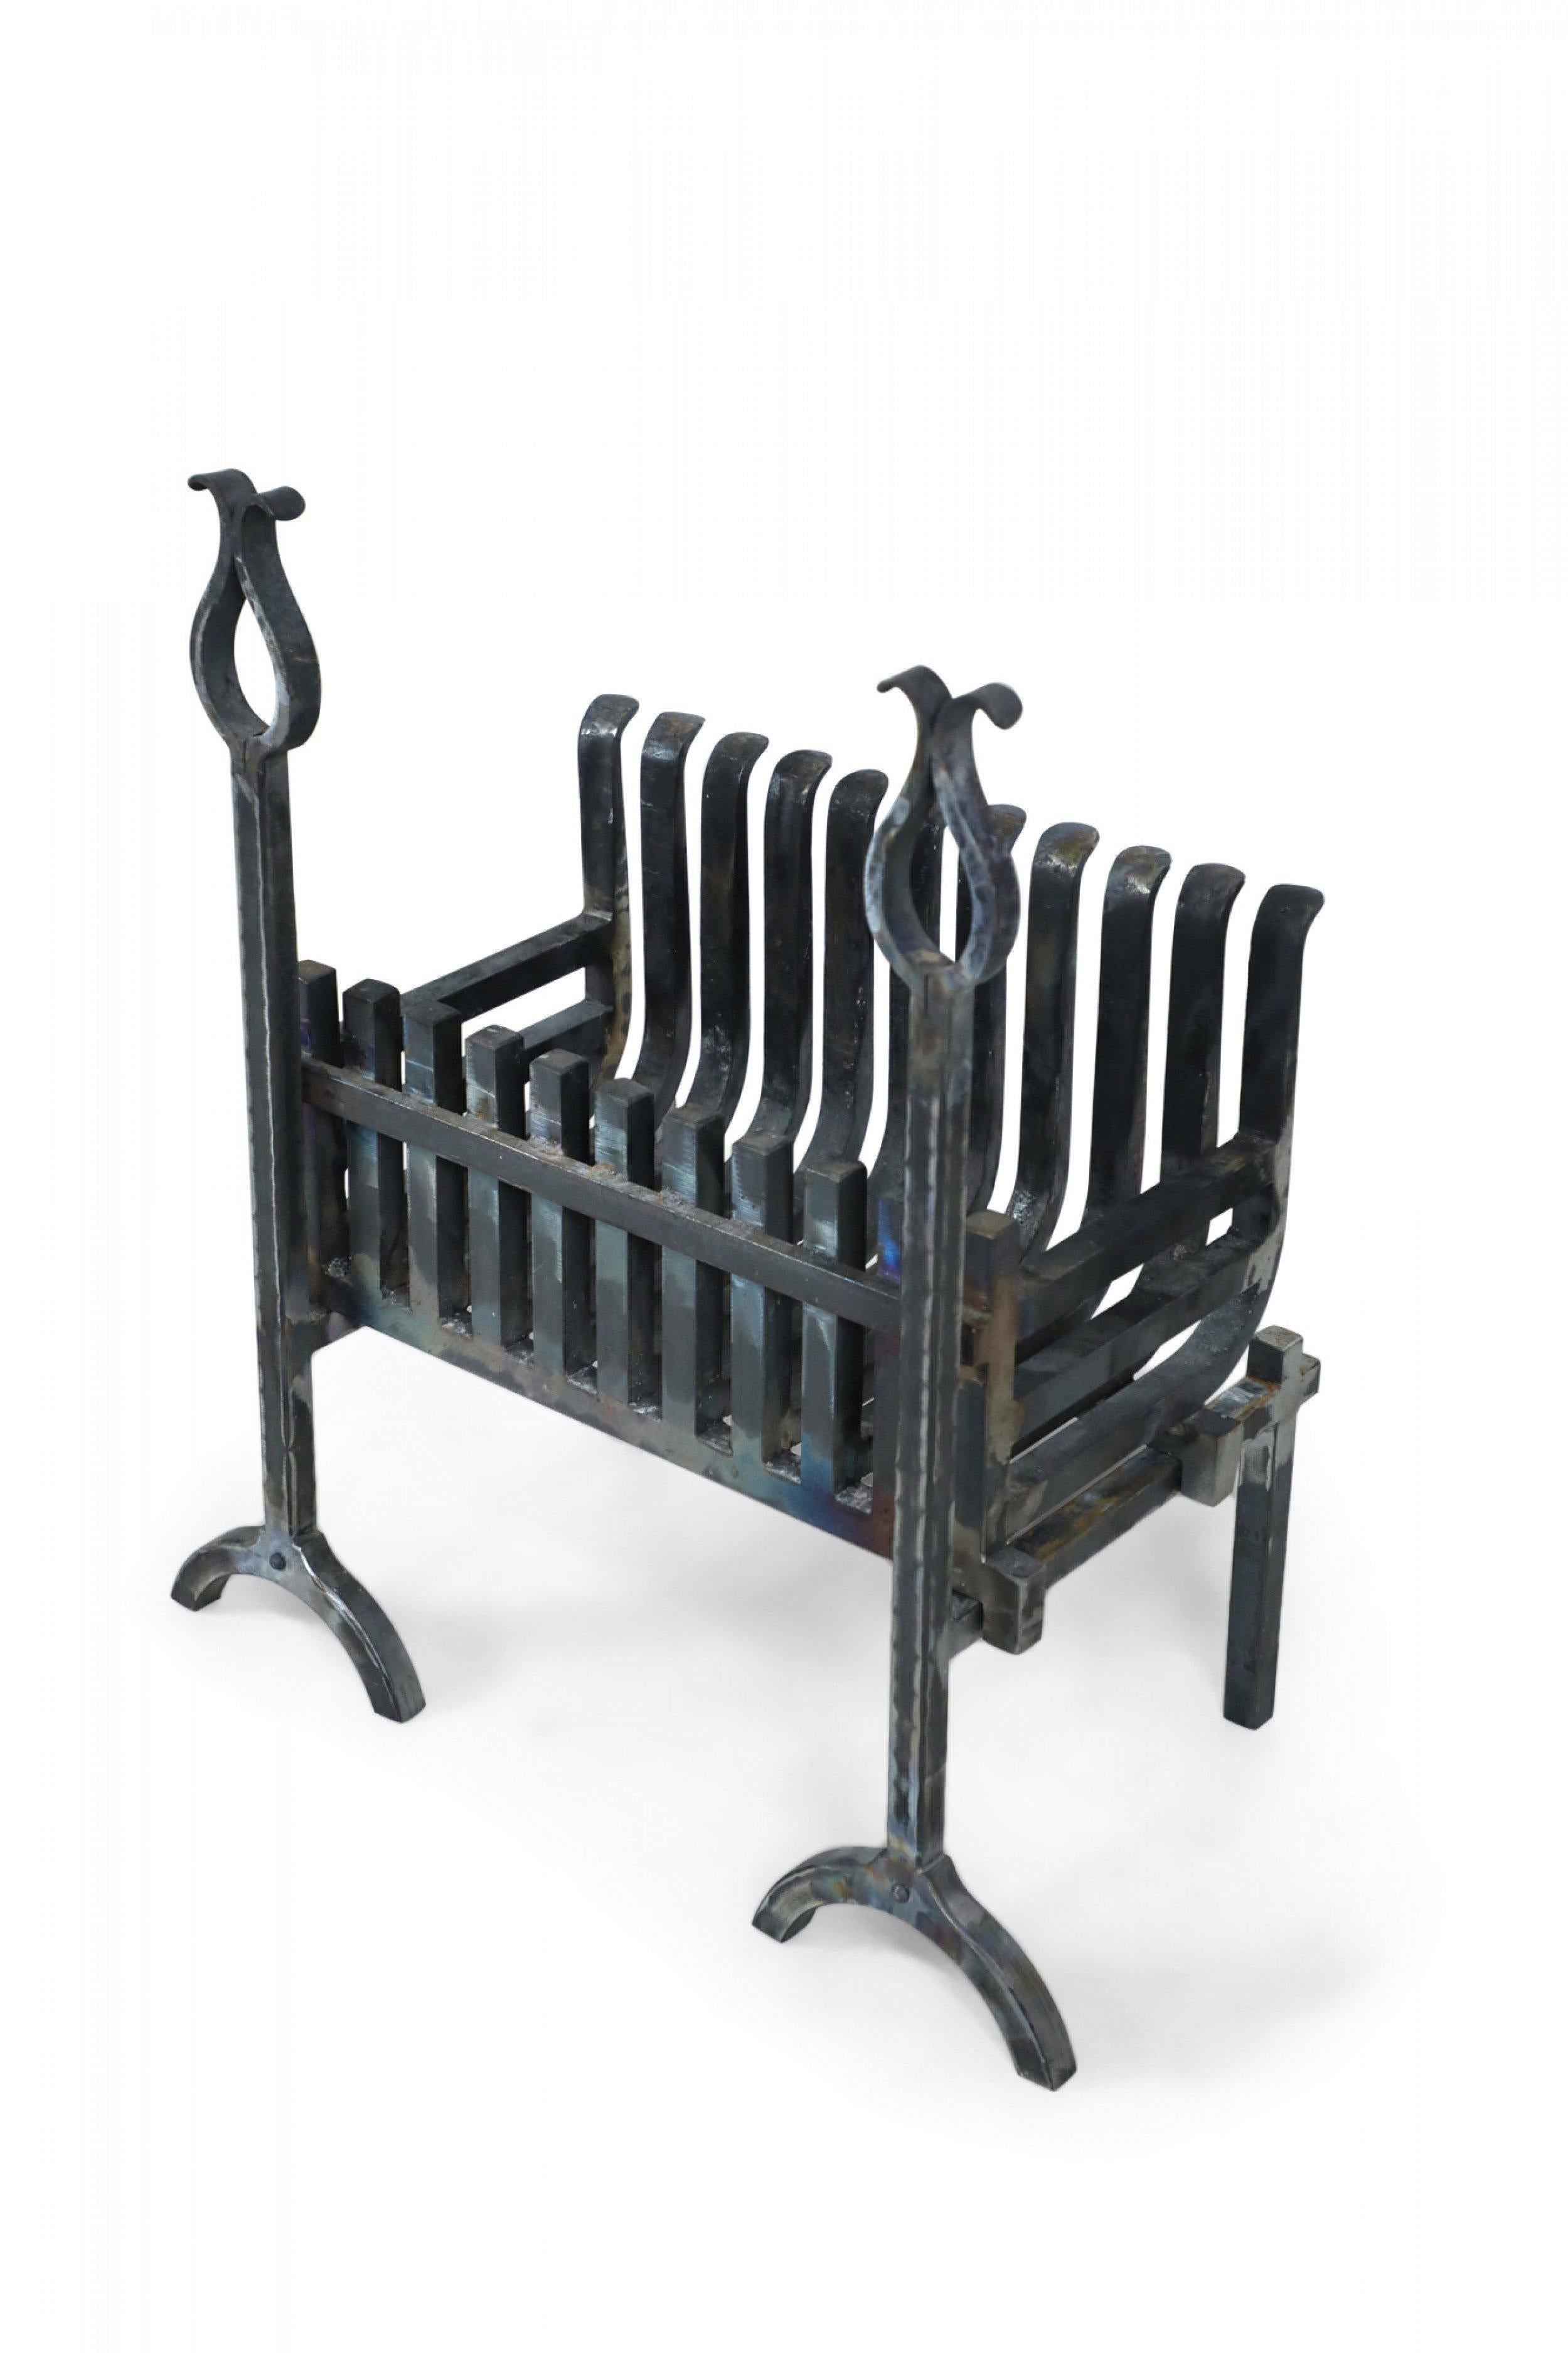 American Art Deco Iron Fire Grate with Andirons In Good Condition For Sale In New York, NY